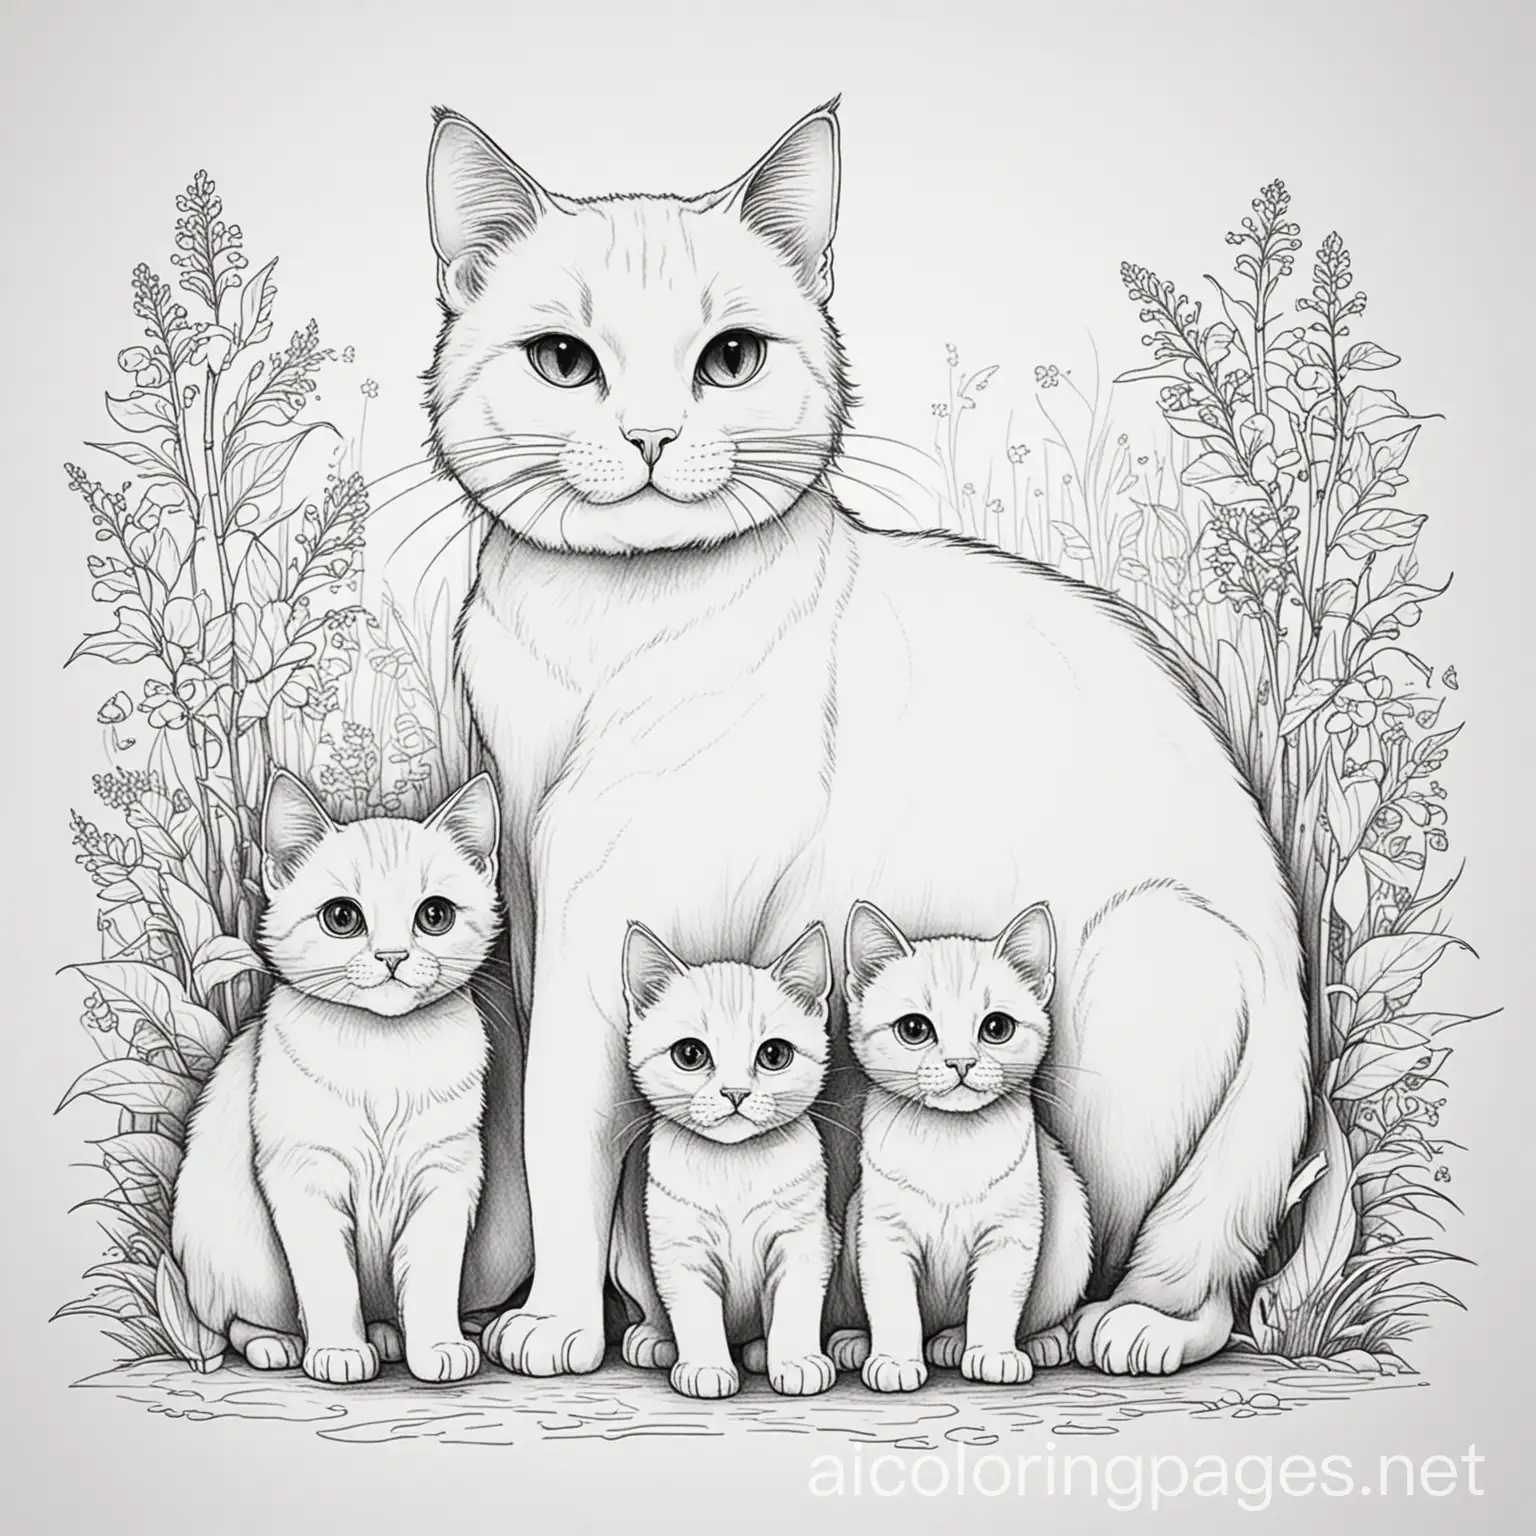 Mommy cat and kittens outside, Coloring Page, black and white, line art, white background, Simplicity, Ample White Space. The background of the coloring page is plain white to make it easy for young children to color within the lines. The outlines of all the subjects are easy to distinguish, making it simple for kids to color without too much difficulty